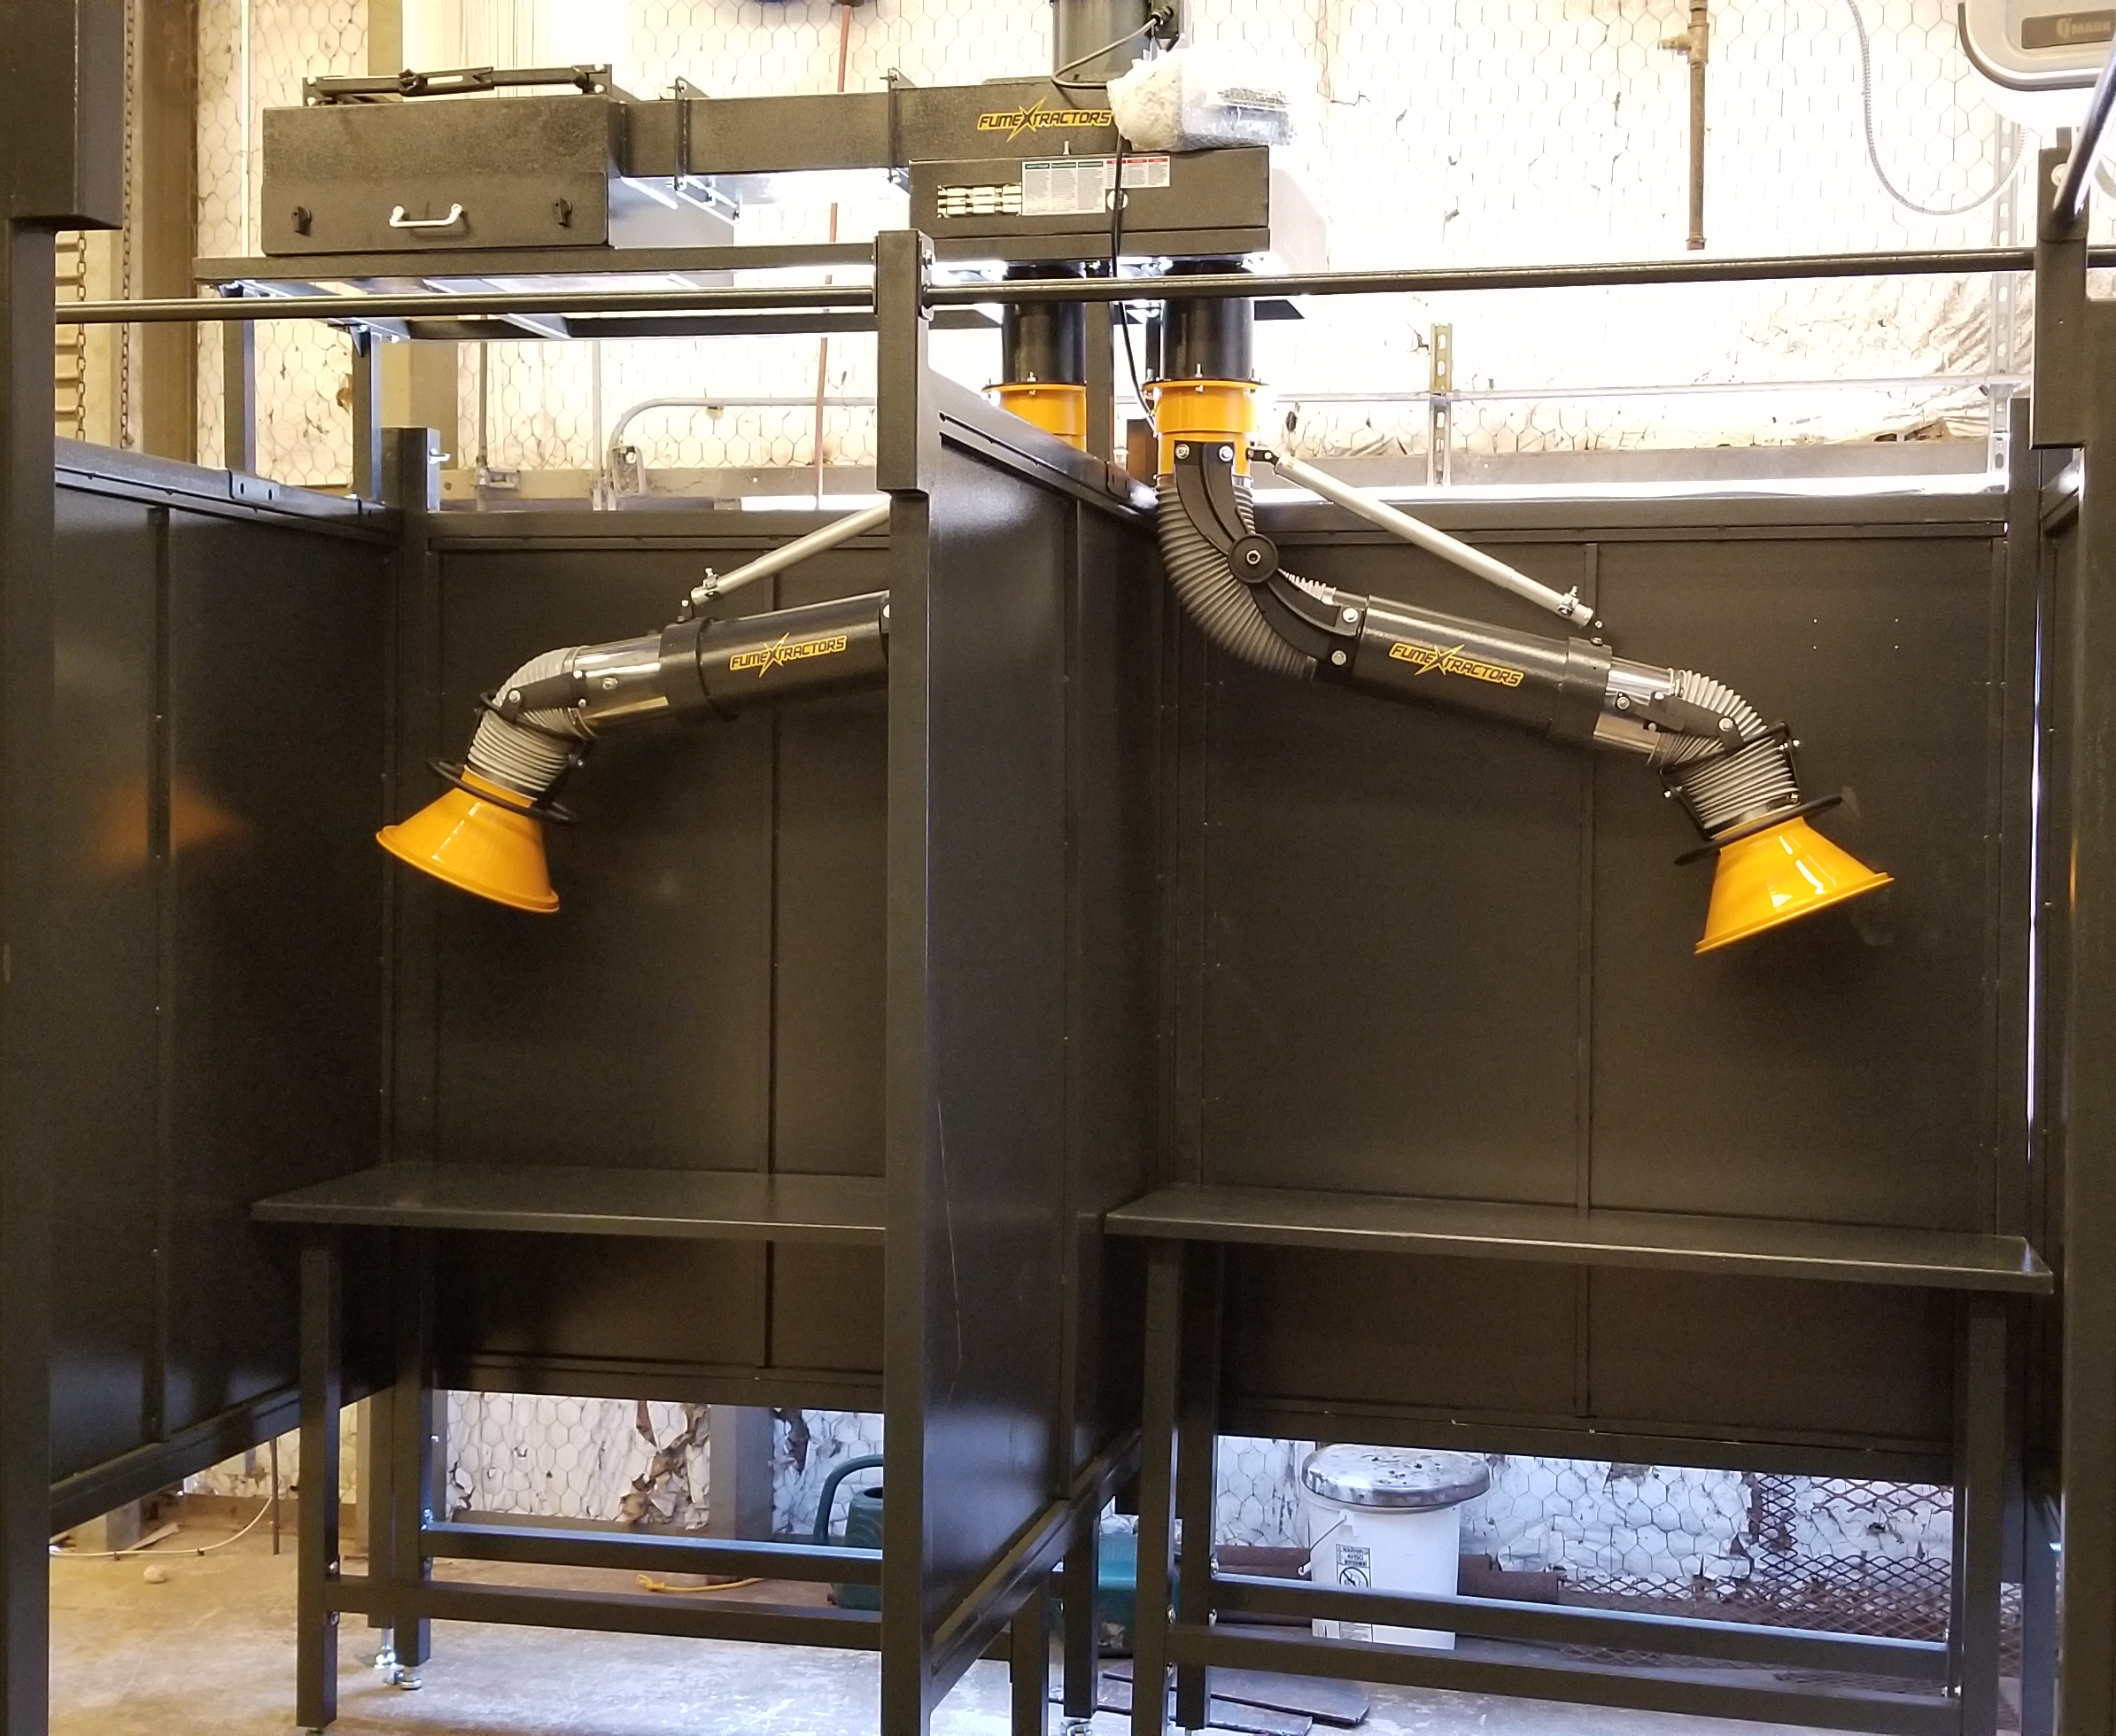 FumeXtractors welding booths and fume arms shown installed in a high school workshop to extract weld fumes and smoke.